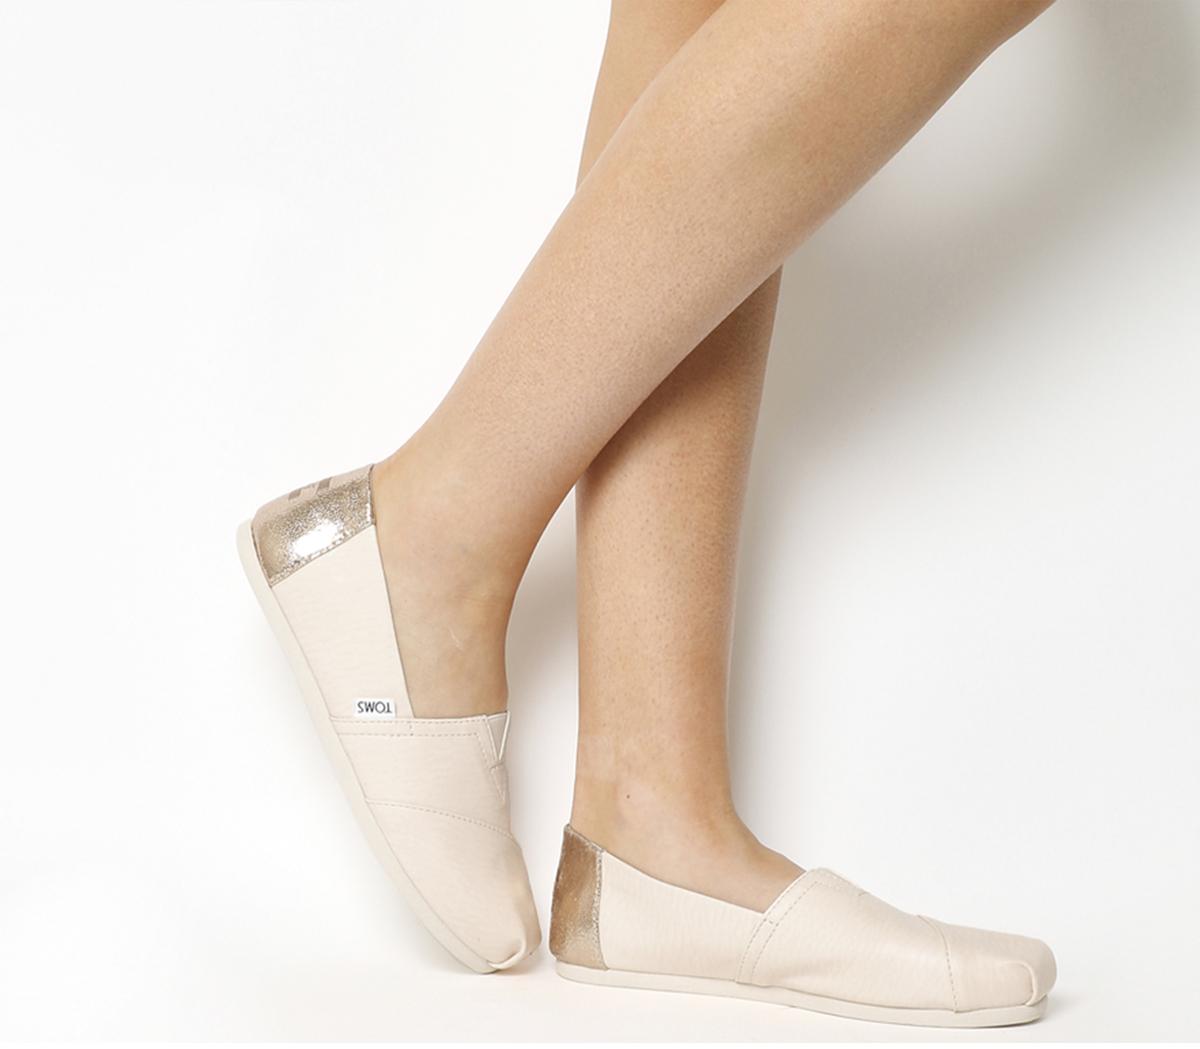 toms nude wedges